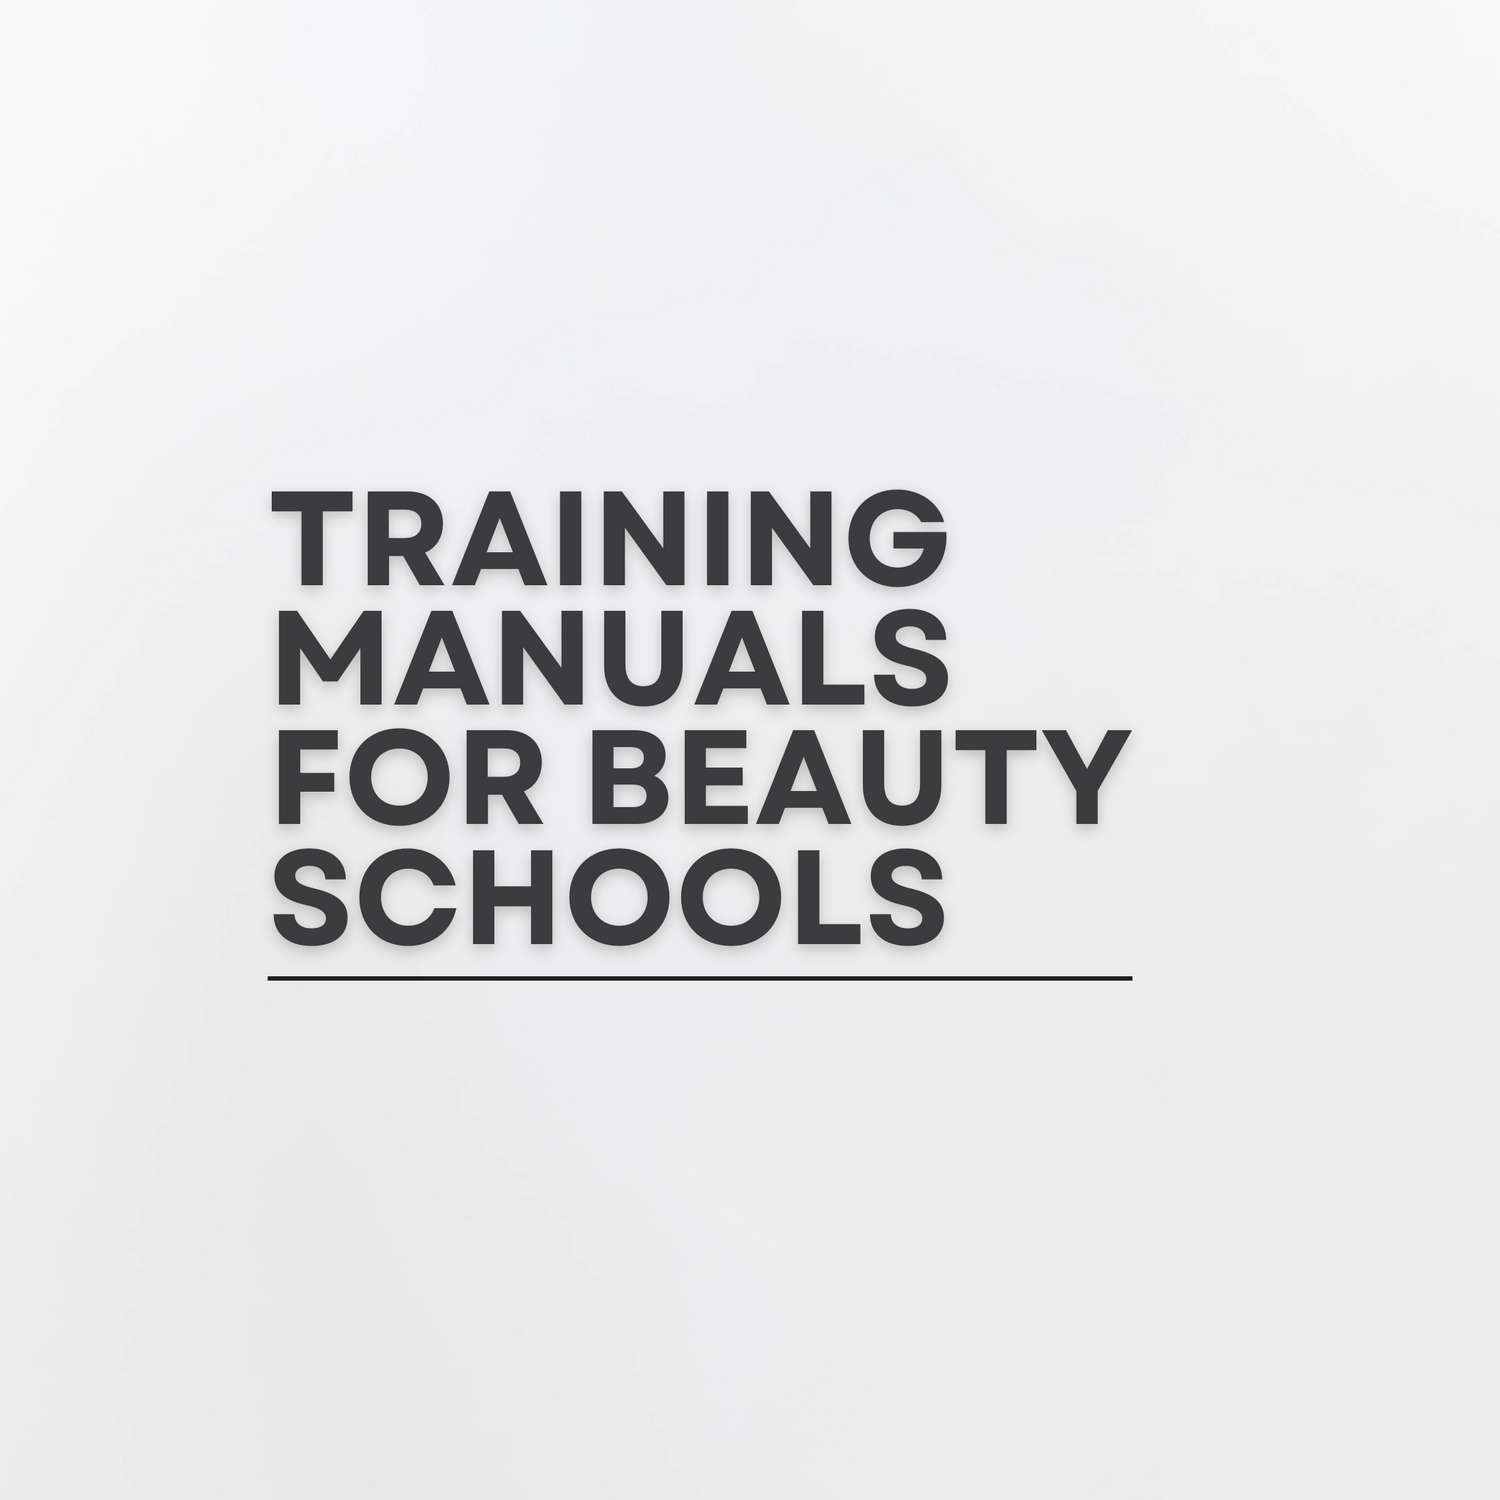 Customizable Training Manuals for Beauty Schools